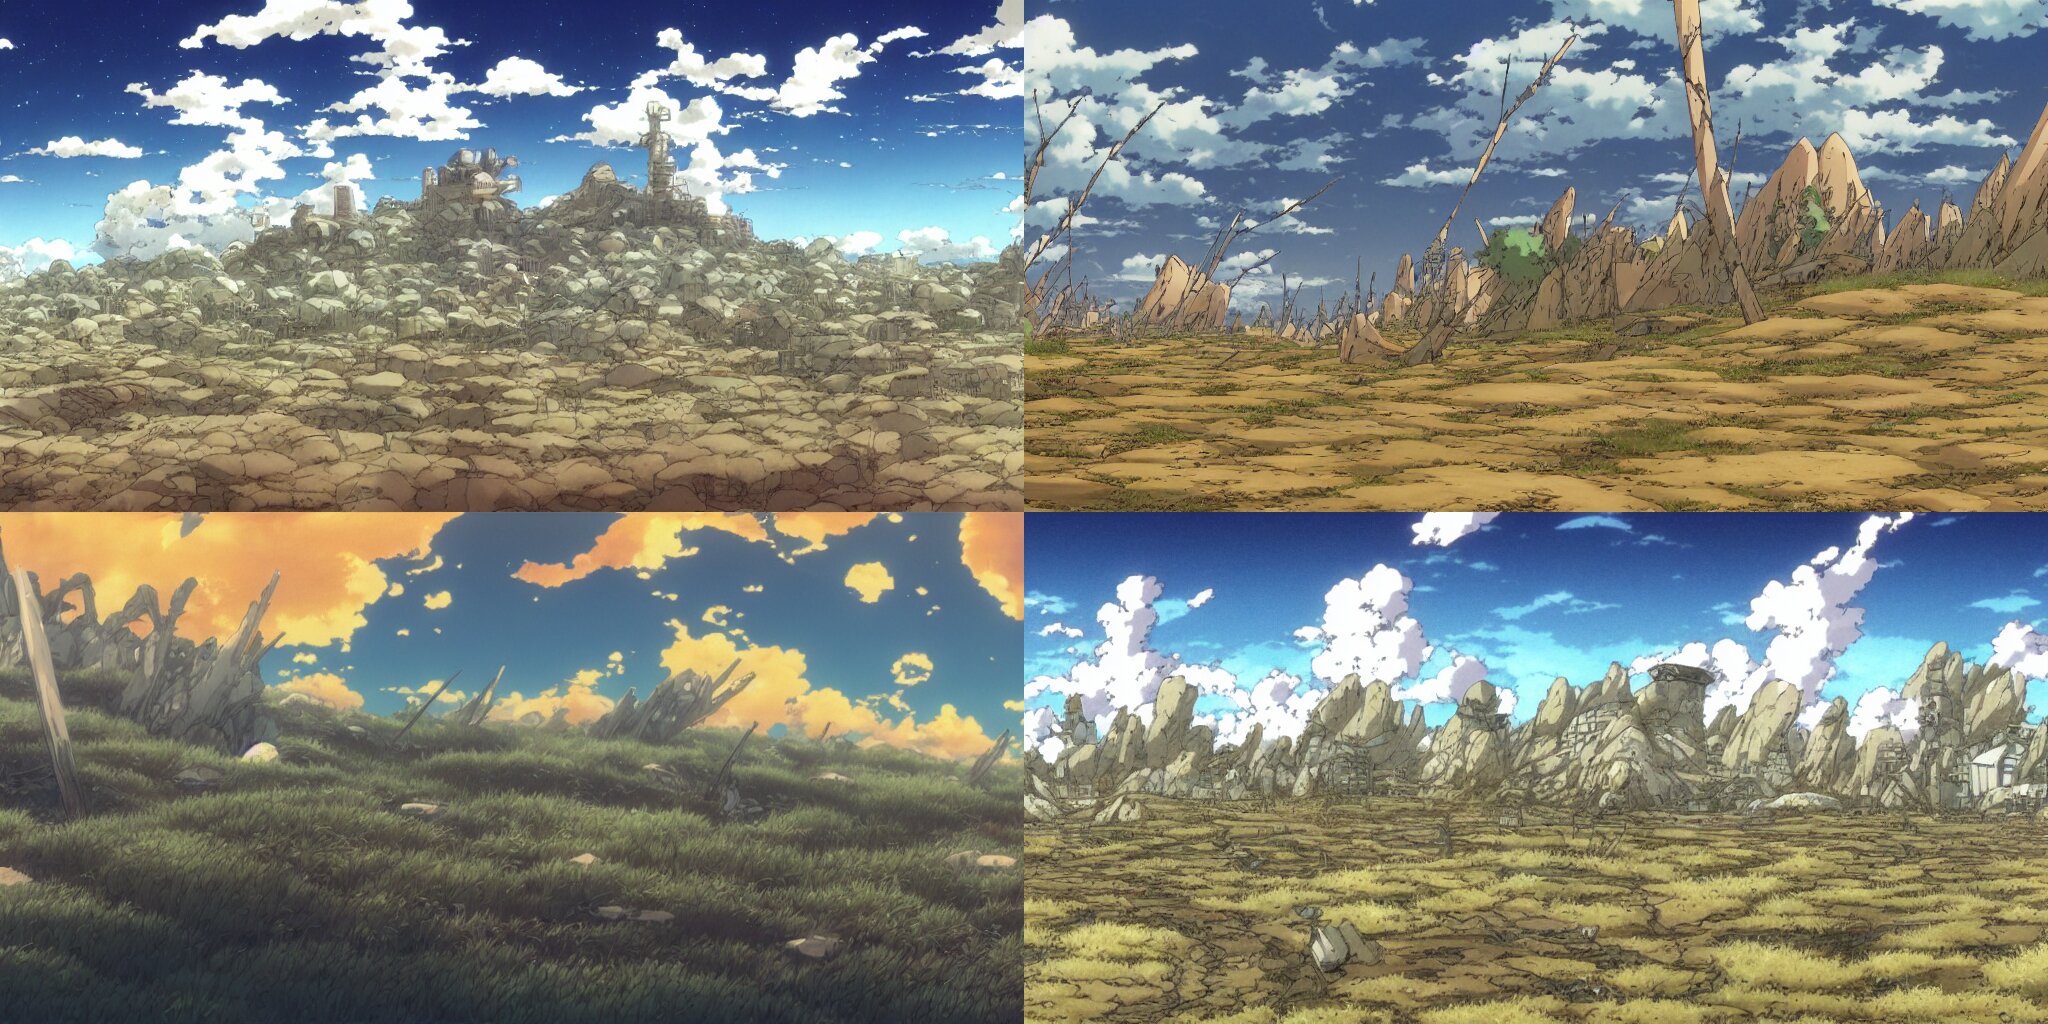 image of 4 anime battle backgrounds fitting a JRPG